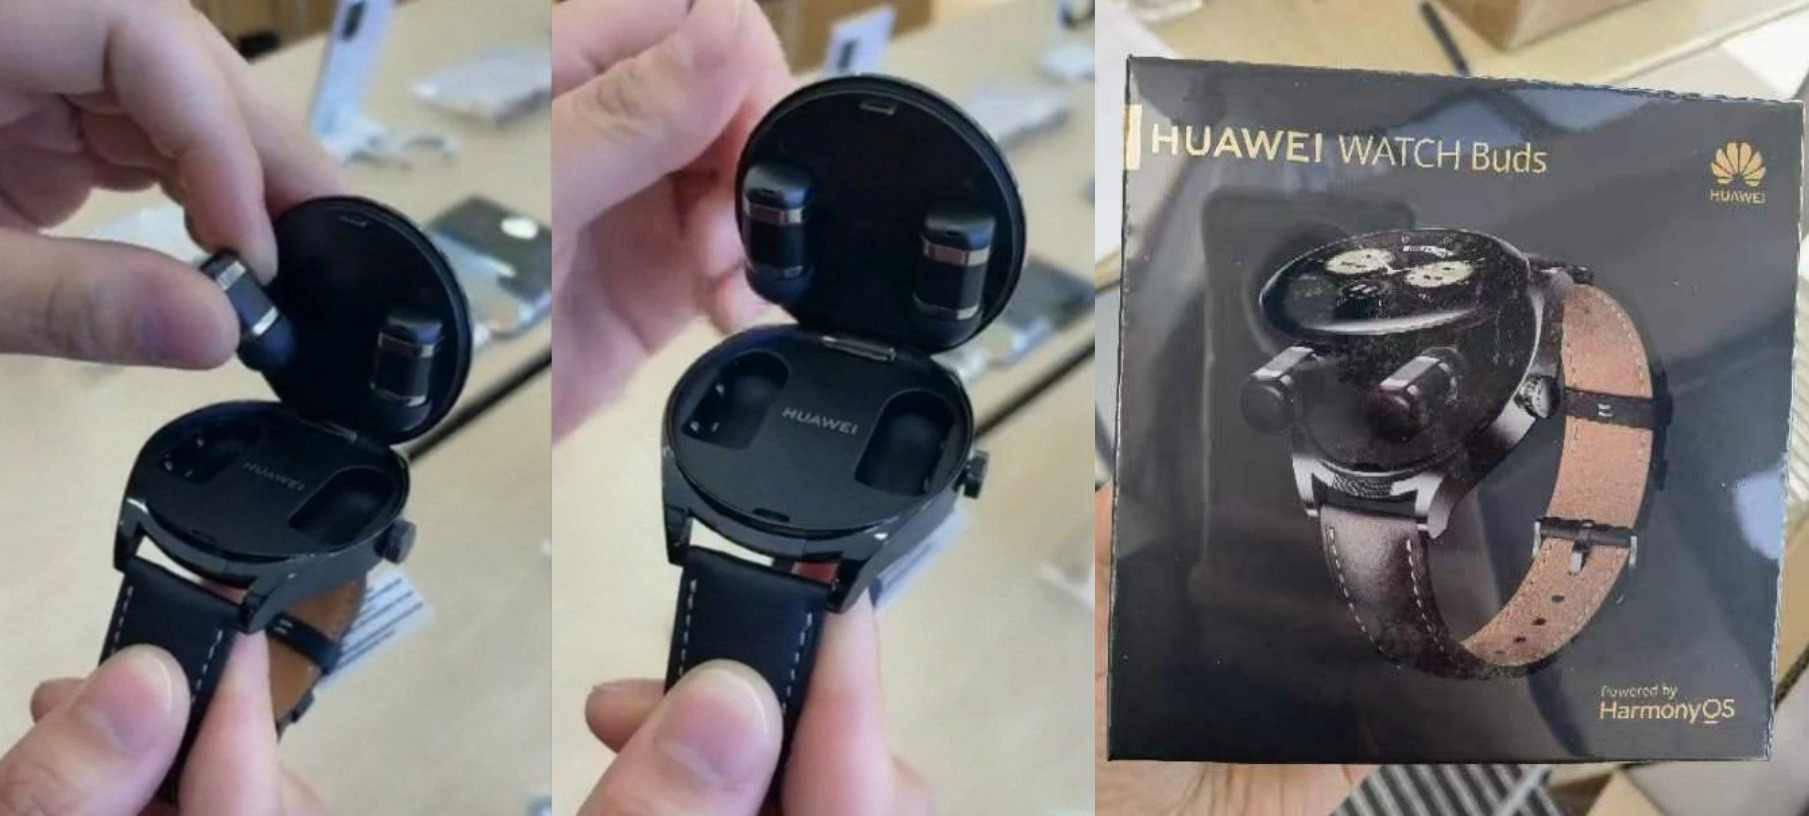 That's what the Huawei Watch Buds will be - a strange smartwatch with headphones hidden inside the case